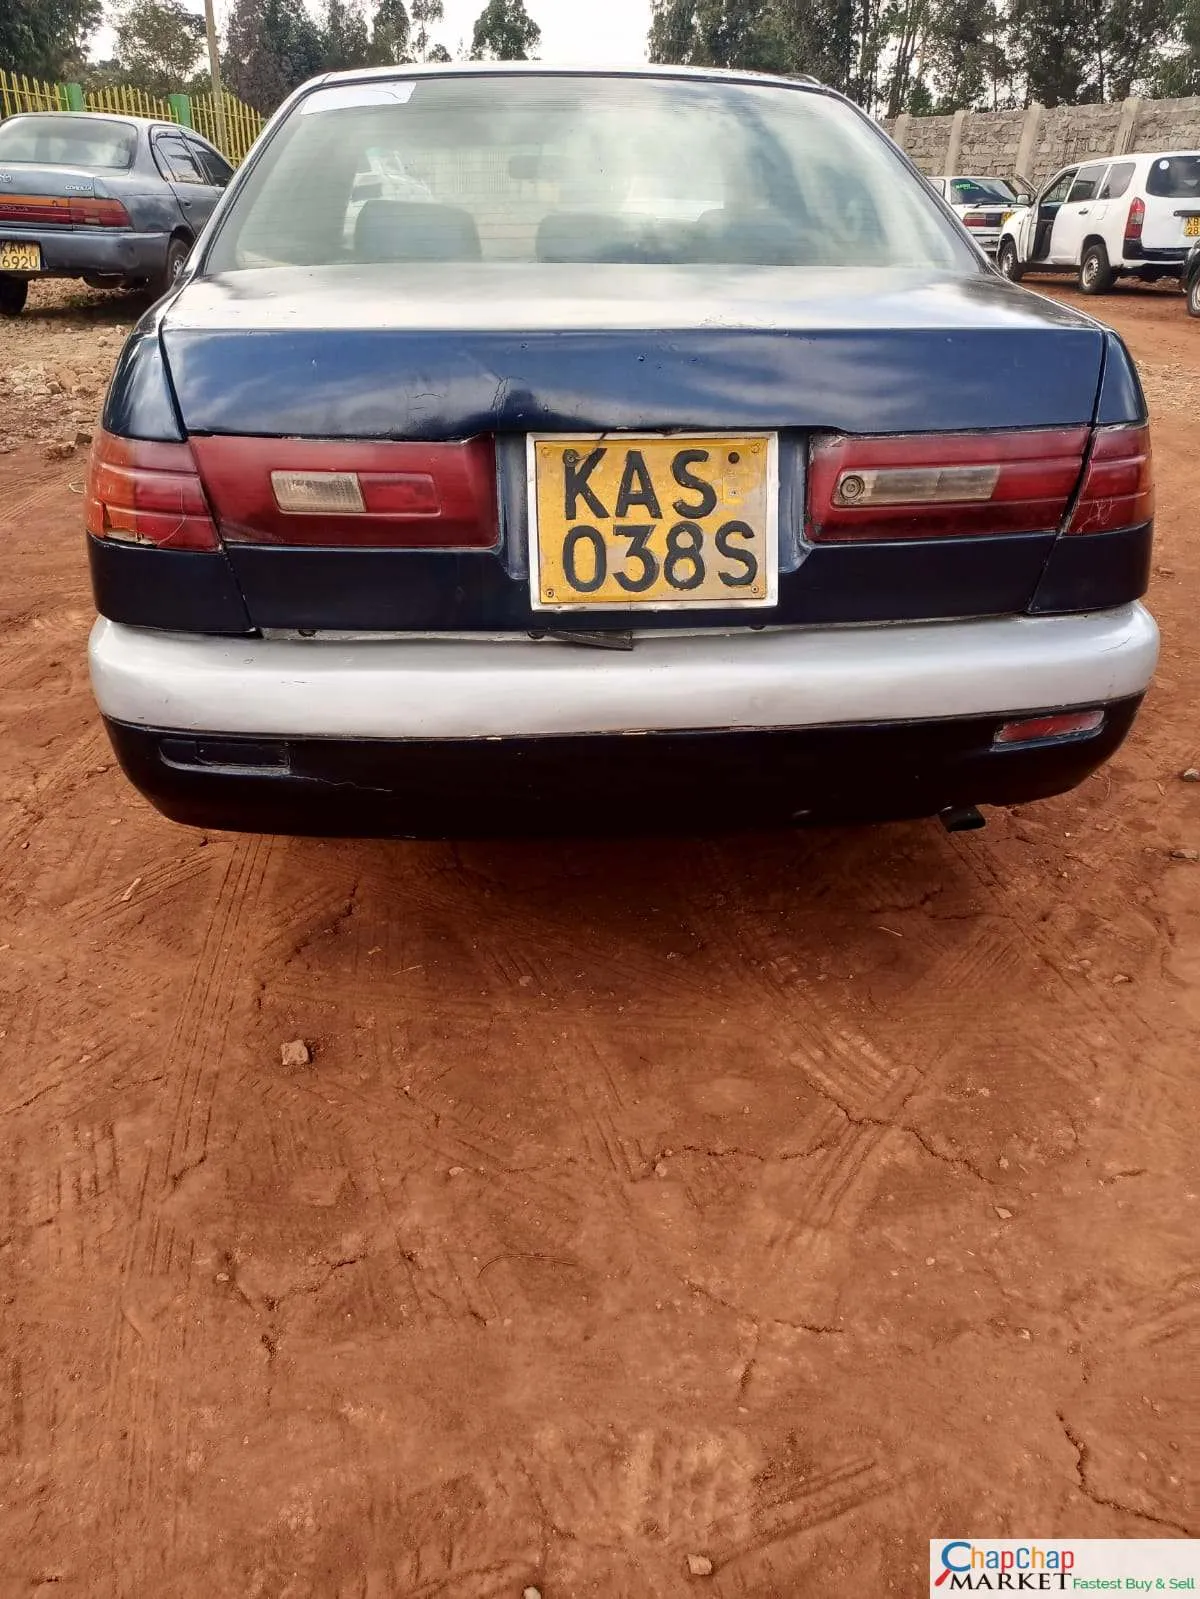 Toyota Premio for sale in Kenya nyoka 220k ONLY You pay 50% Deposit Trade in Ok EXCLUSIVE